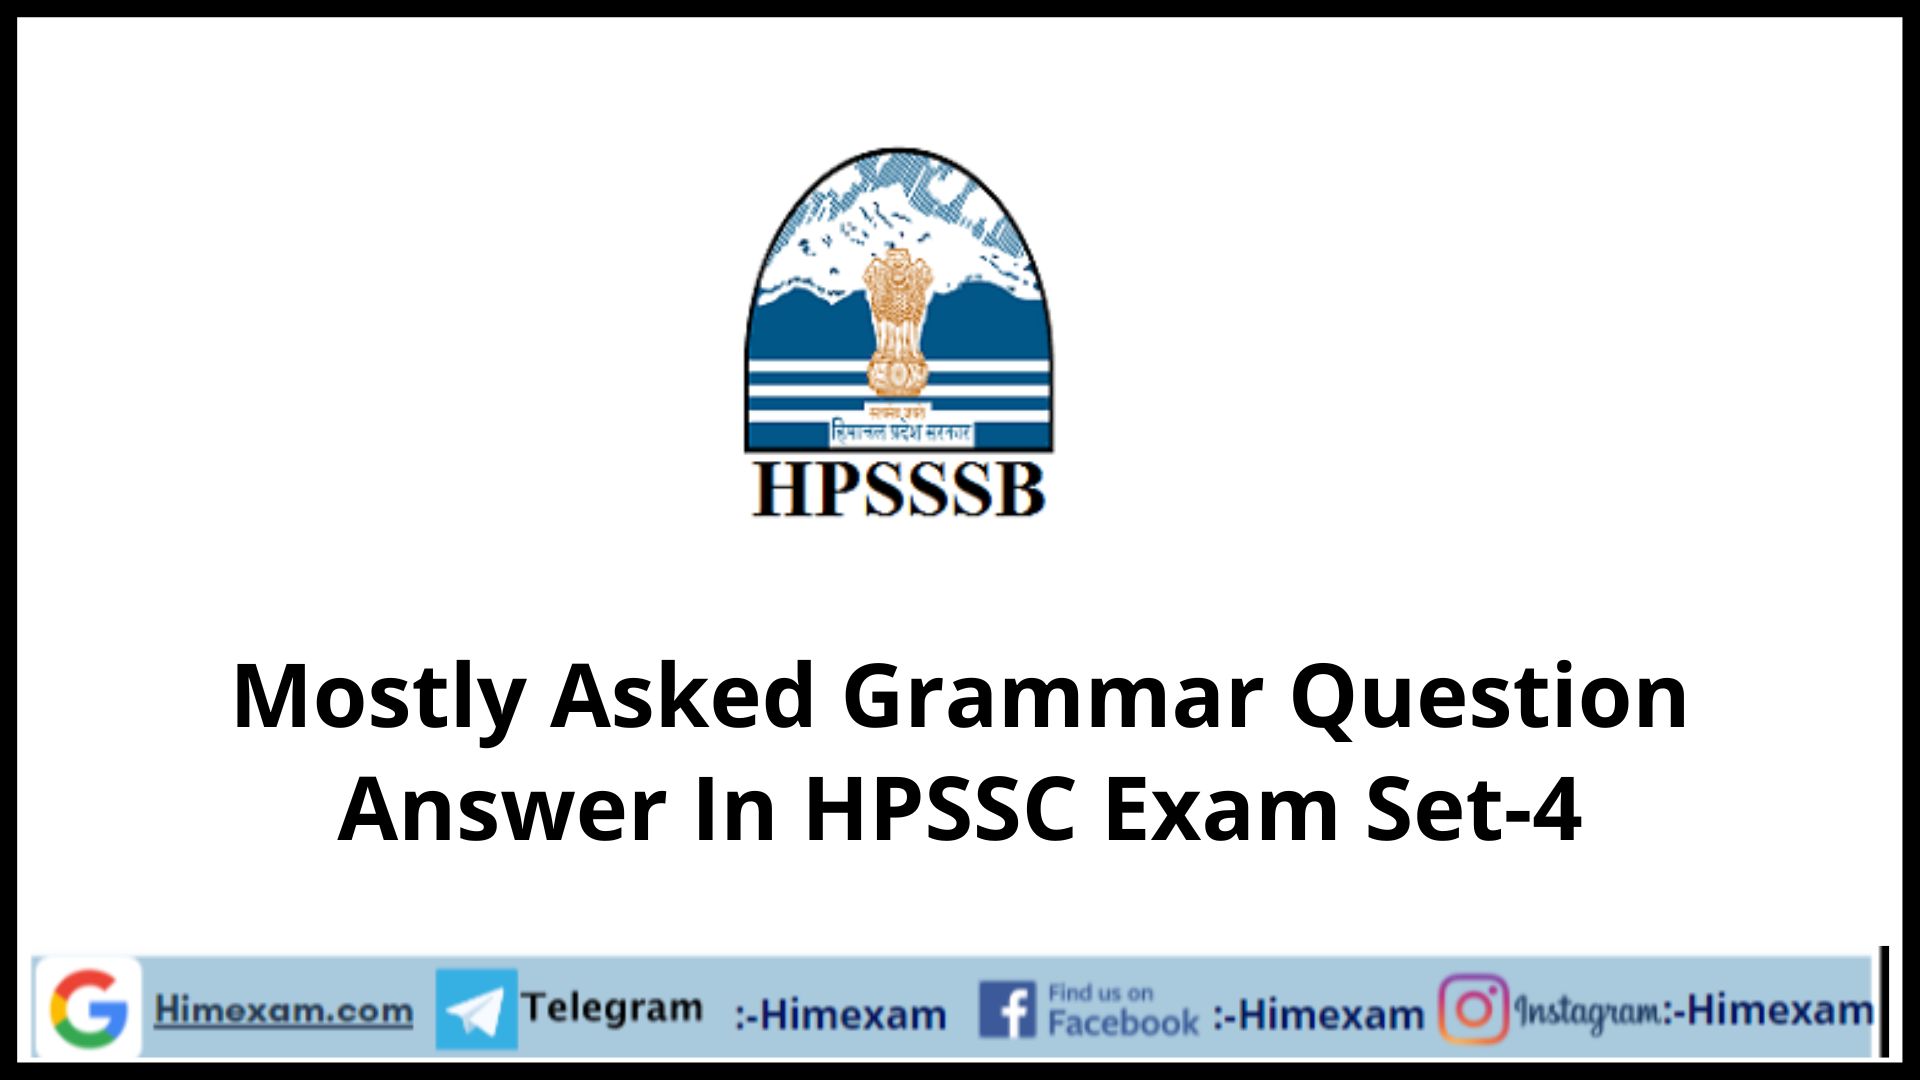 Mostly Asked Grammar Question Answer In HPSSC Exam Set-4